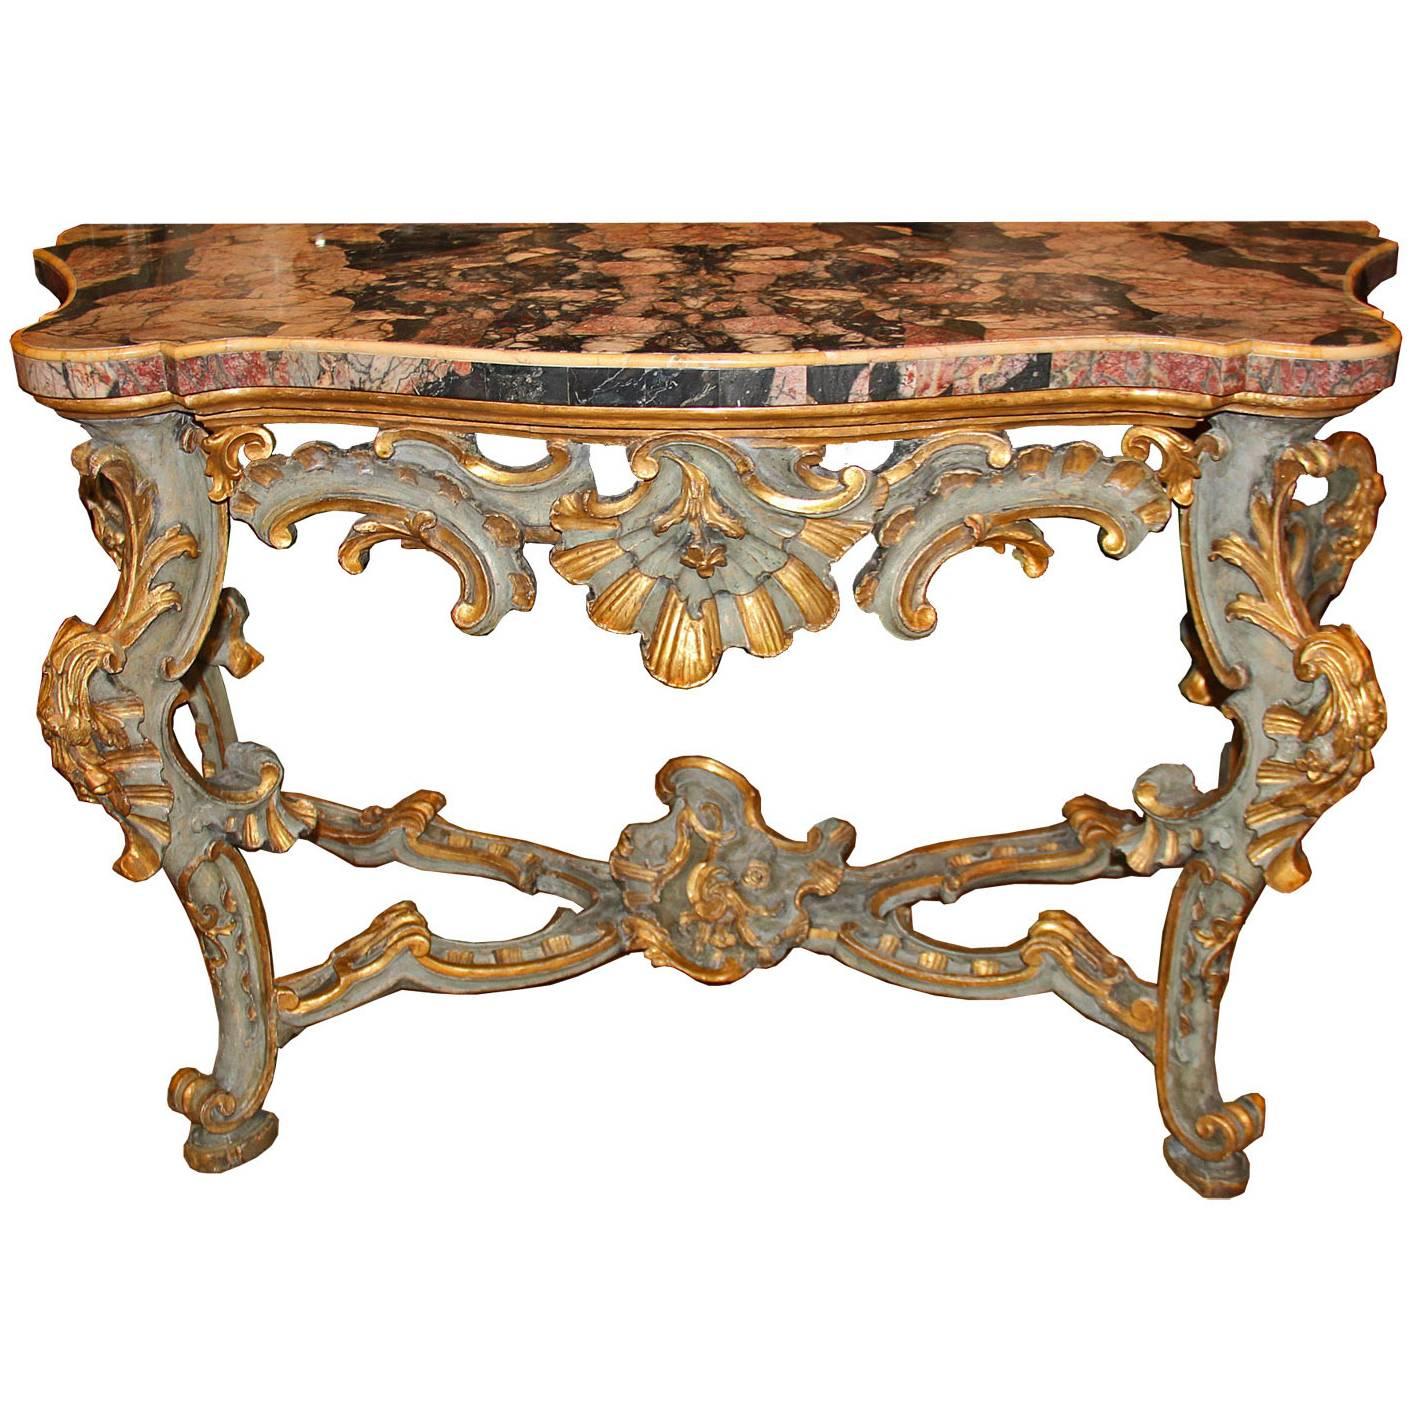 18th Century Venetian Rococo Pale Blue Polychrome and Parcel-Gilt Console For Sale